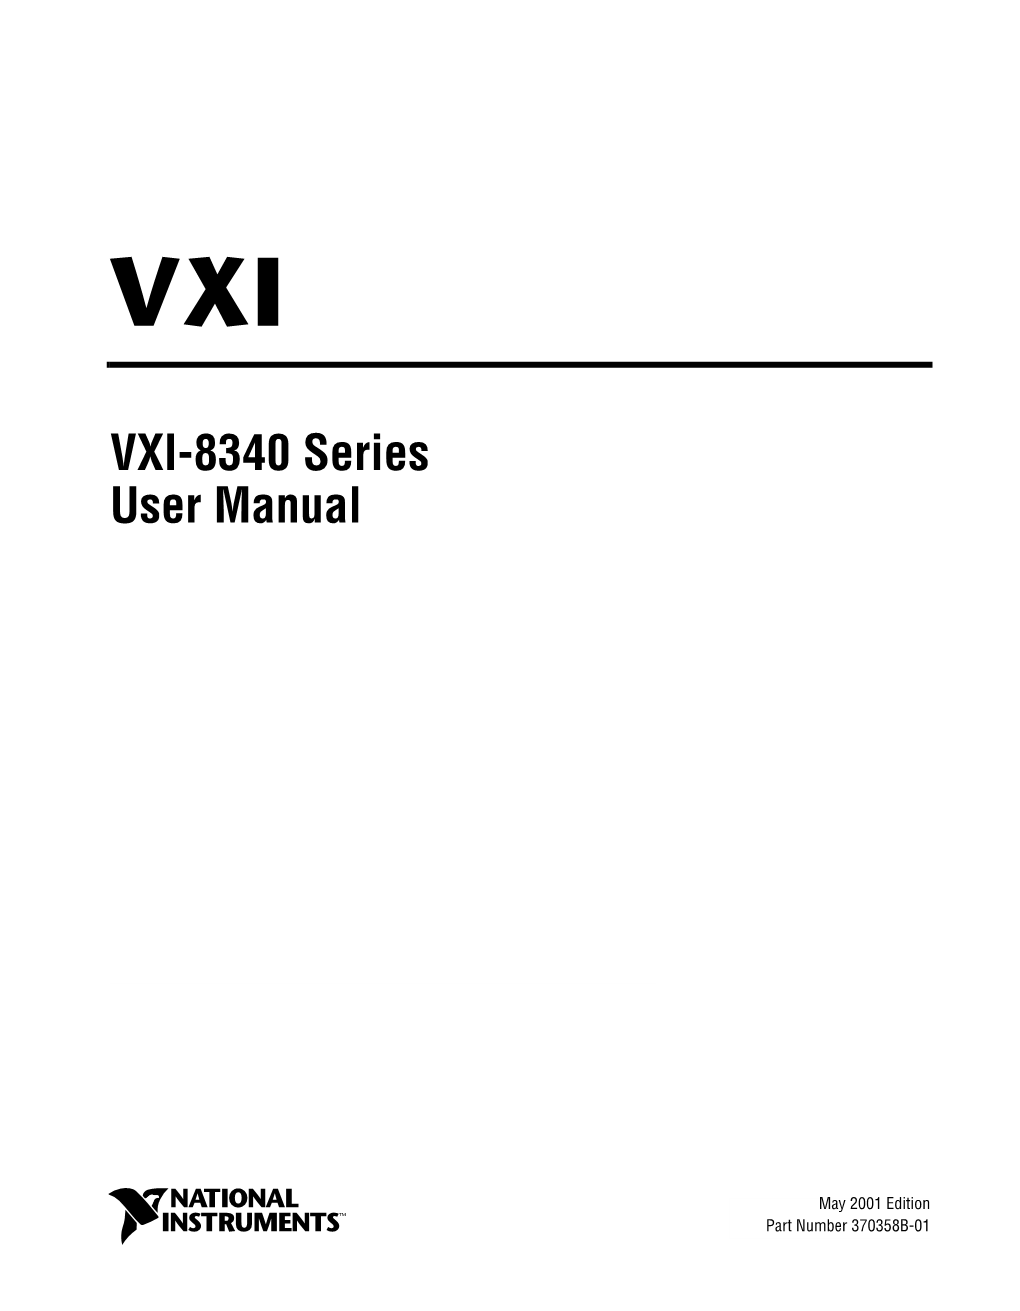 VXI-8340 Series User Manual and Specifications